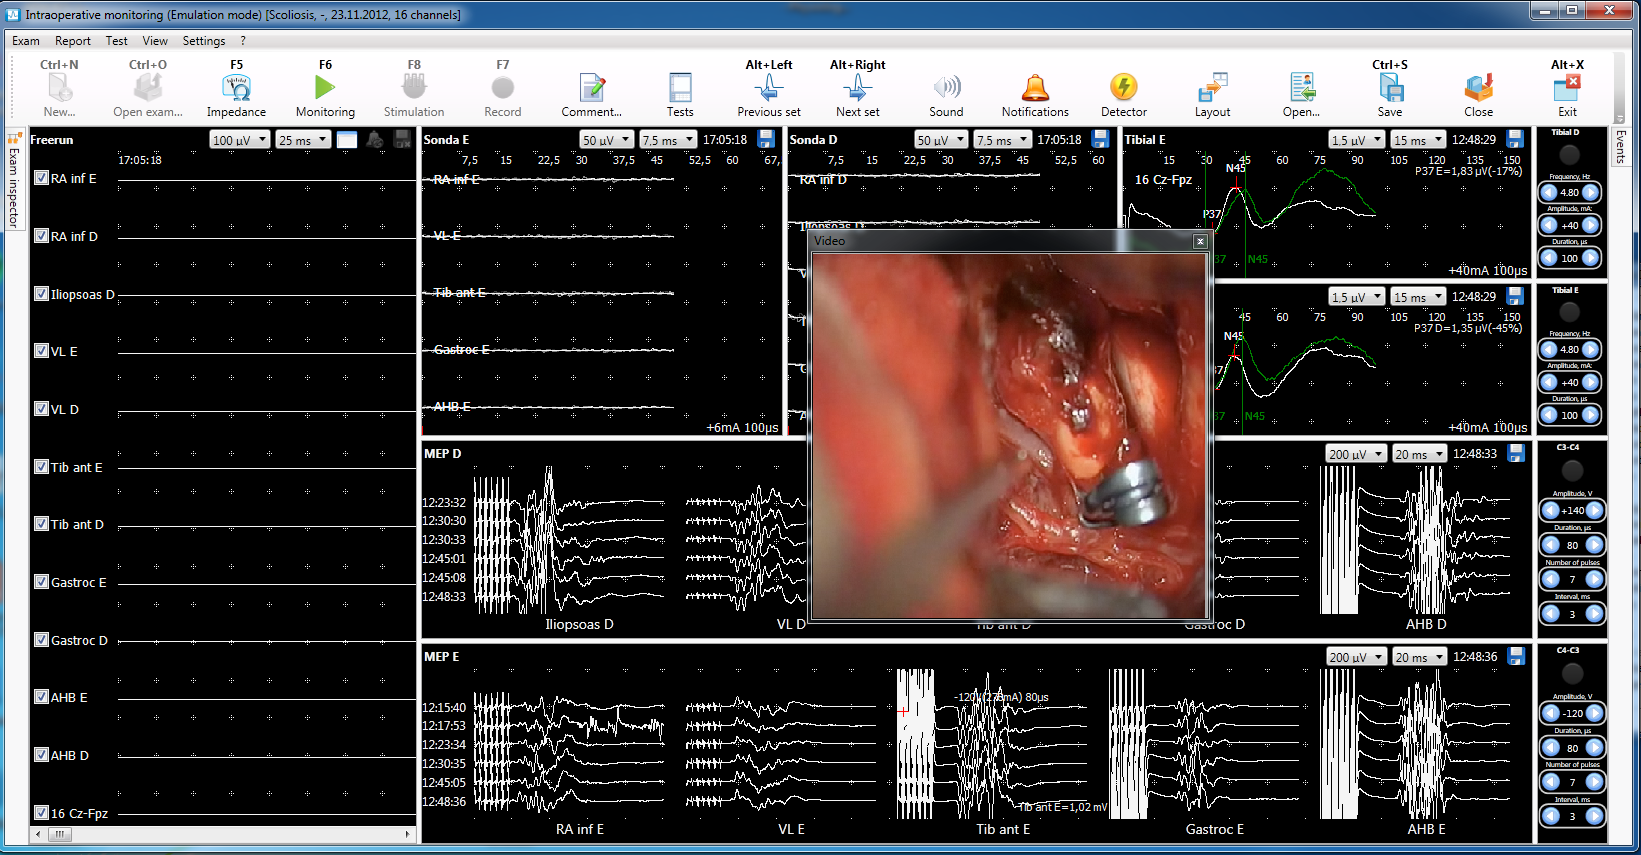 Image of Video Recording during surgery